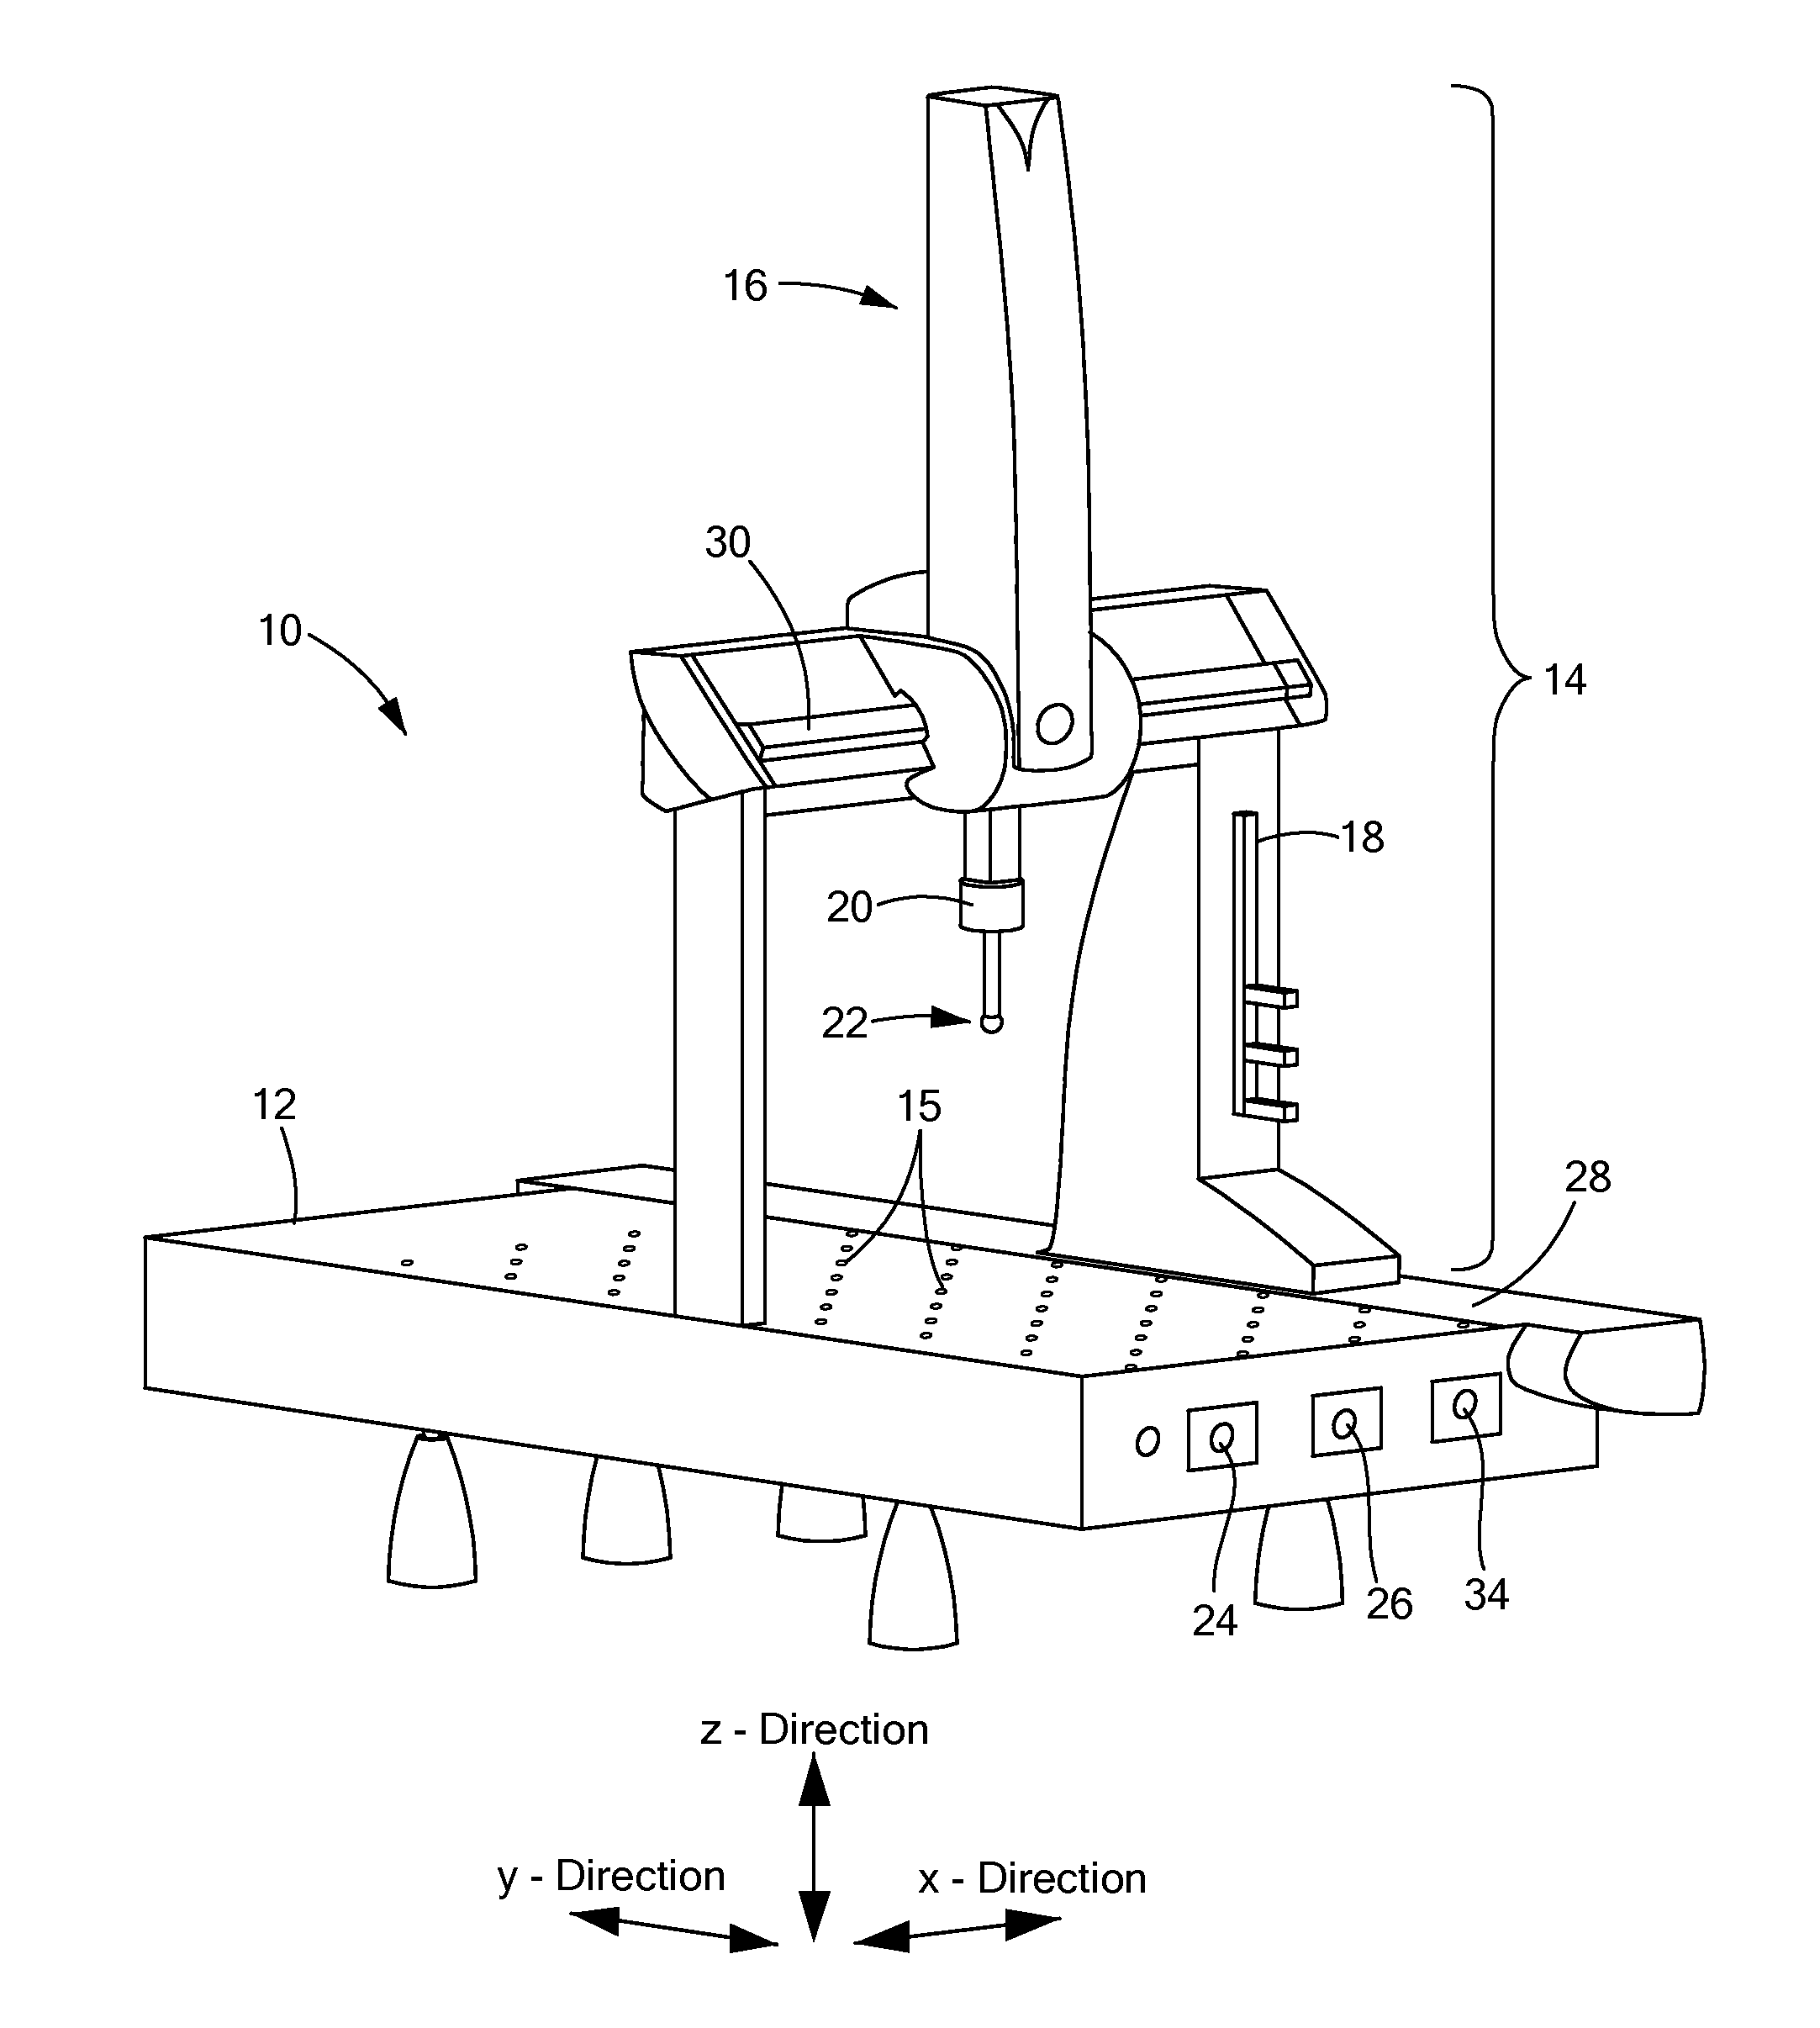 Method and Apparatus for Controlling a Surface Scanning Coordinate Measuring Machine